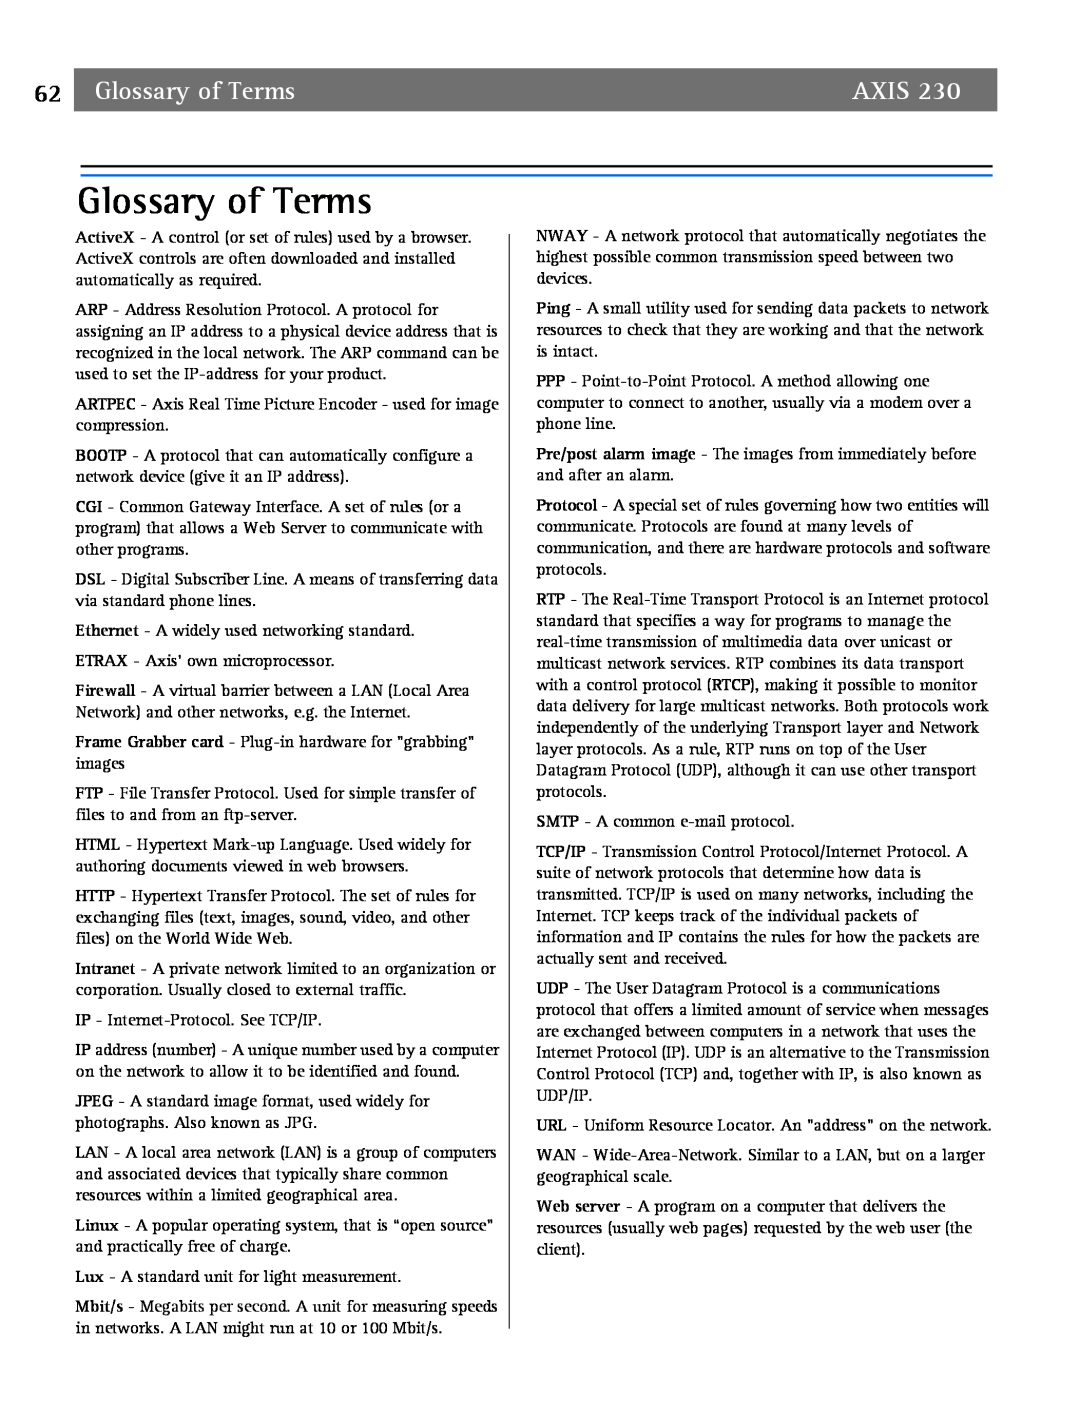 Axis Communications 2 user manual Glossary of Terms, Axis 